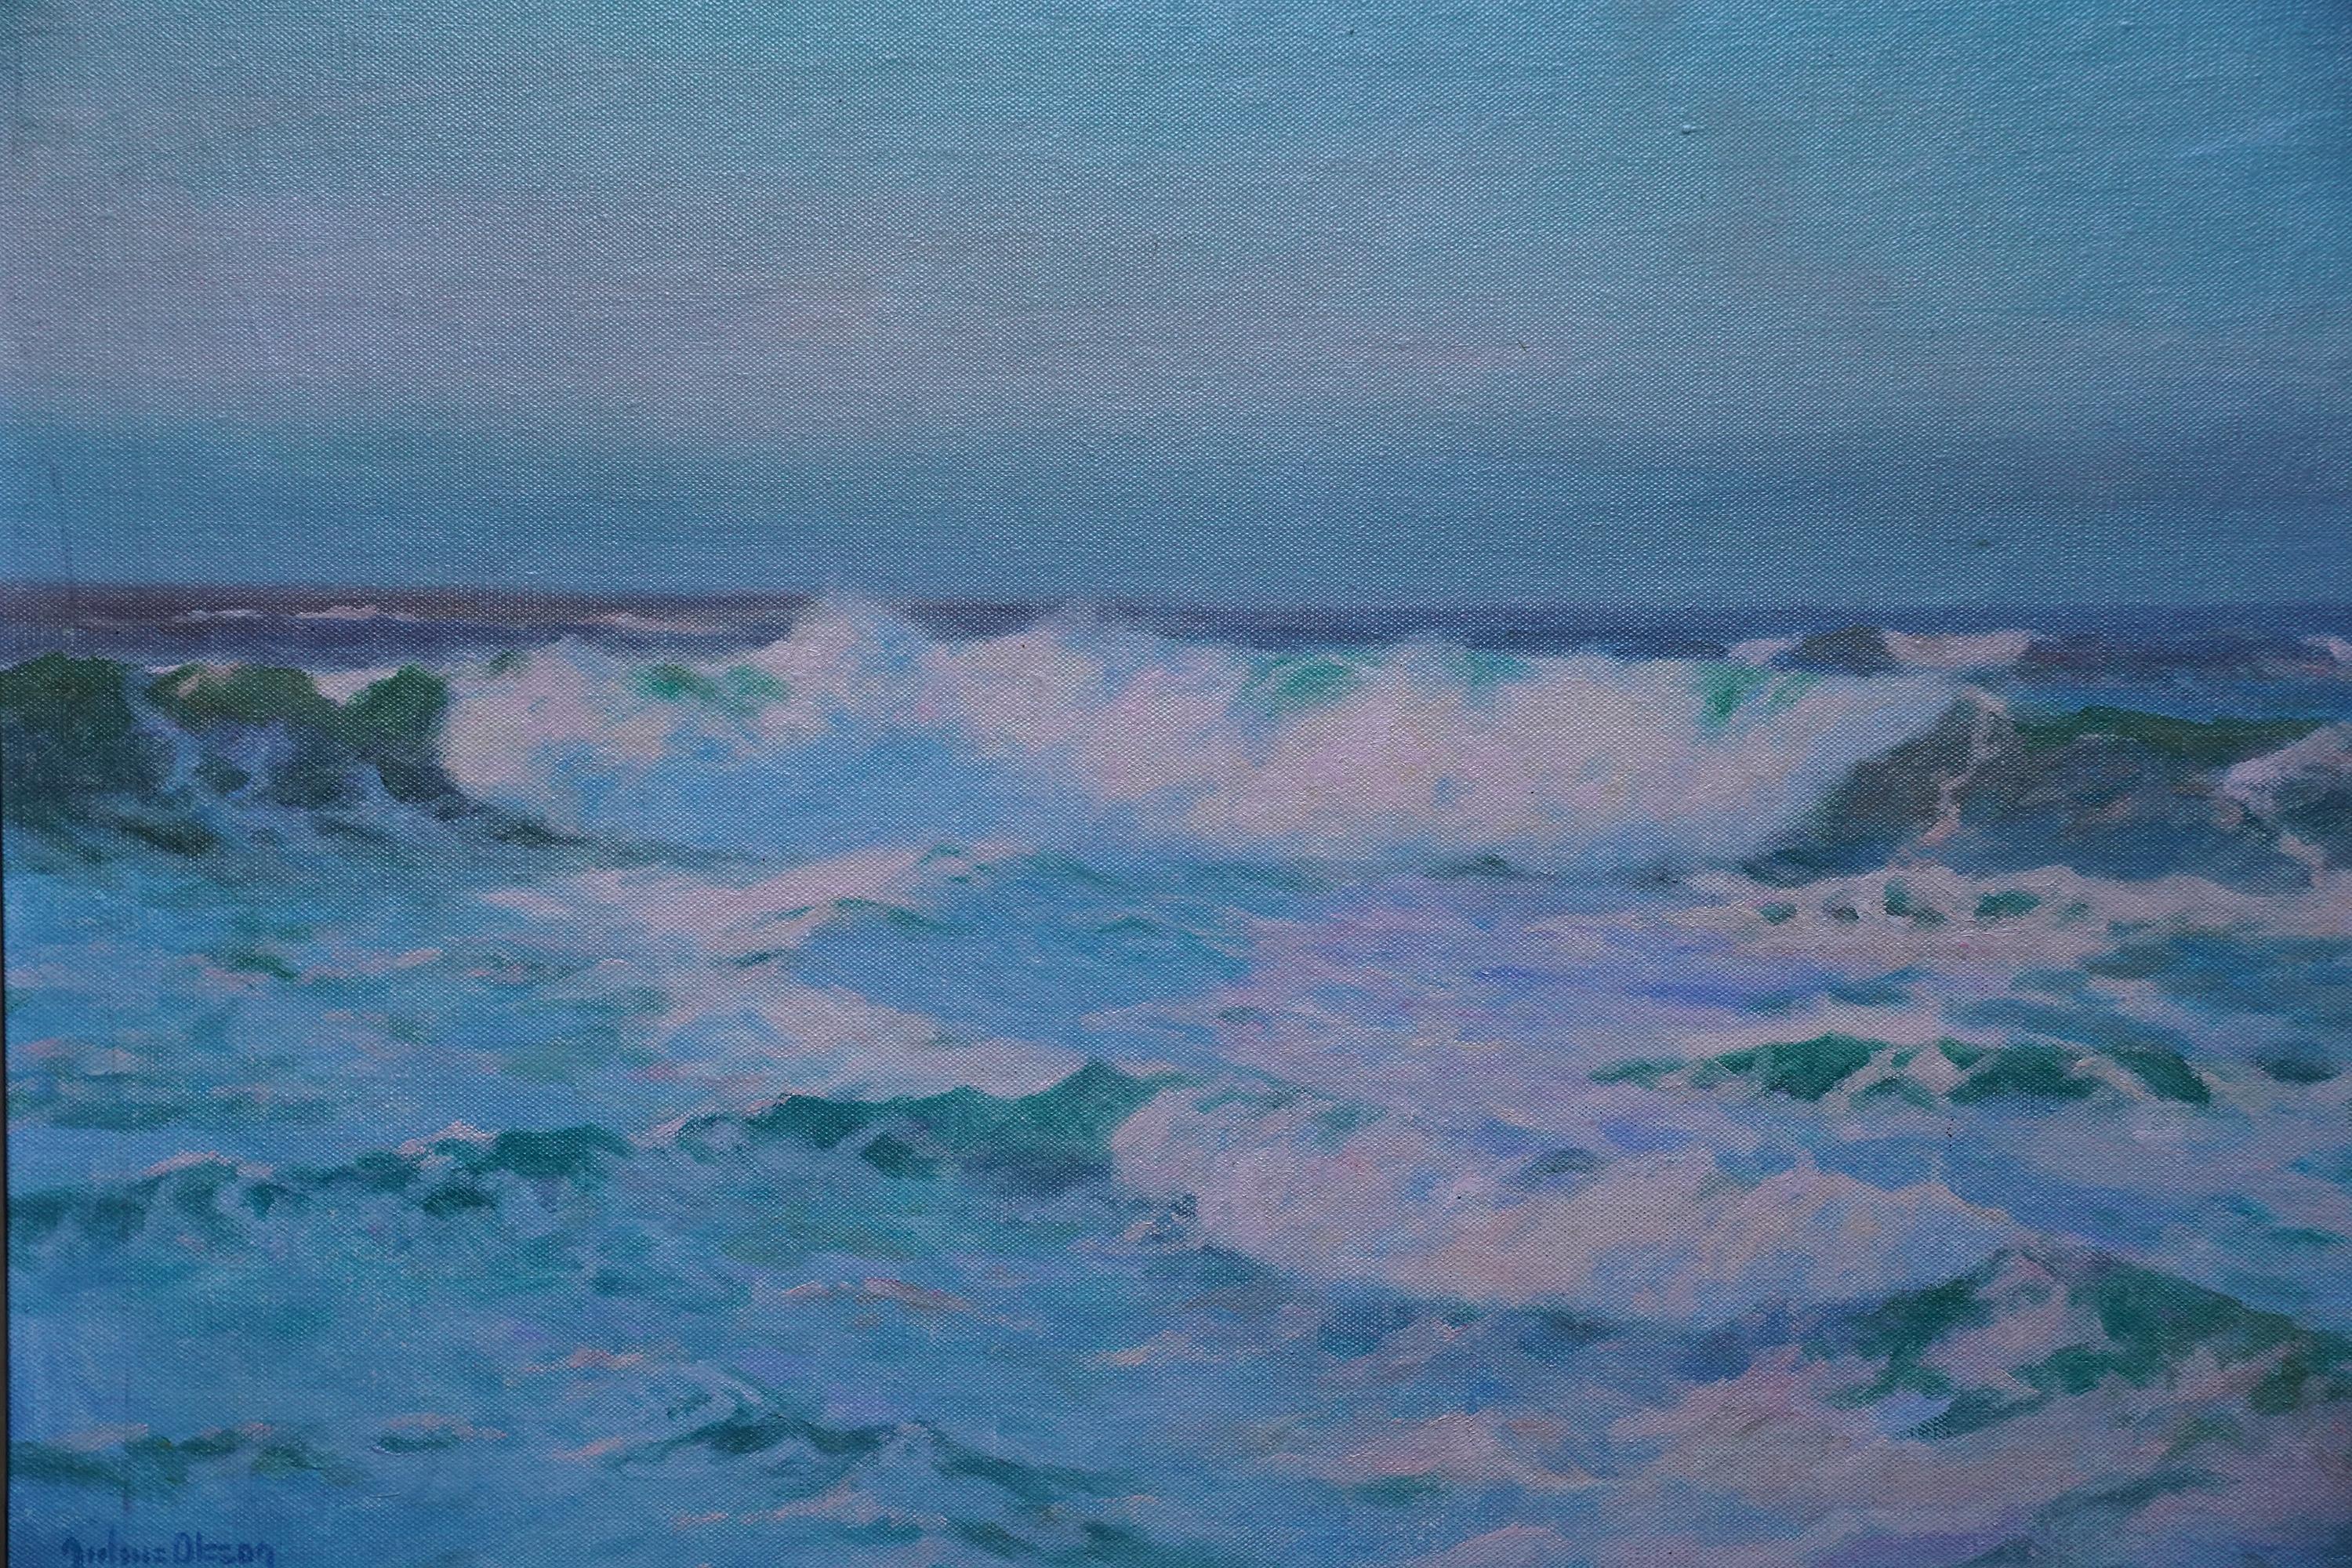 This absolutely stunning British Newlyn School seascape is by noted Cornish artist Julius Olsson. Painted circa 1920 and entitled Sunlit Surf, it is a mass of foamy crashing waves, beautifully lit by sunlight with patches of brilliant green. The